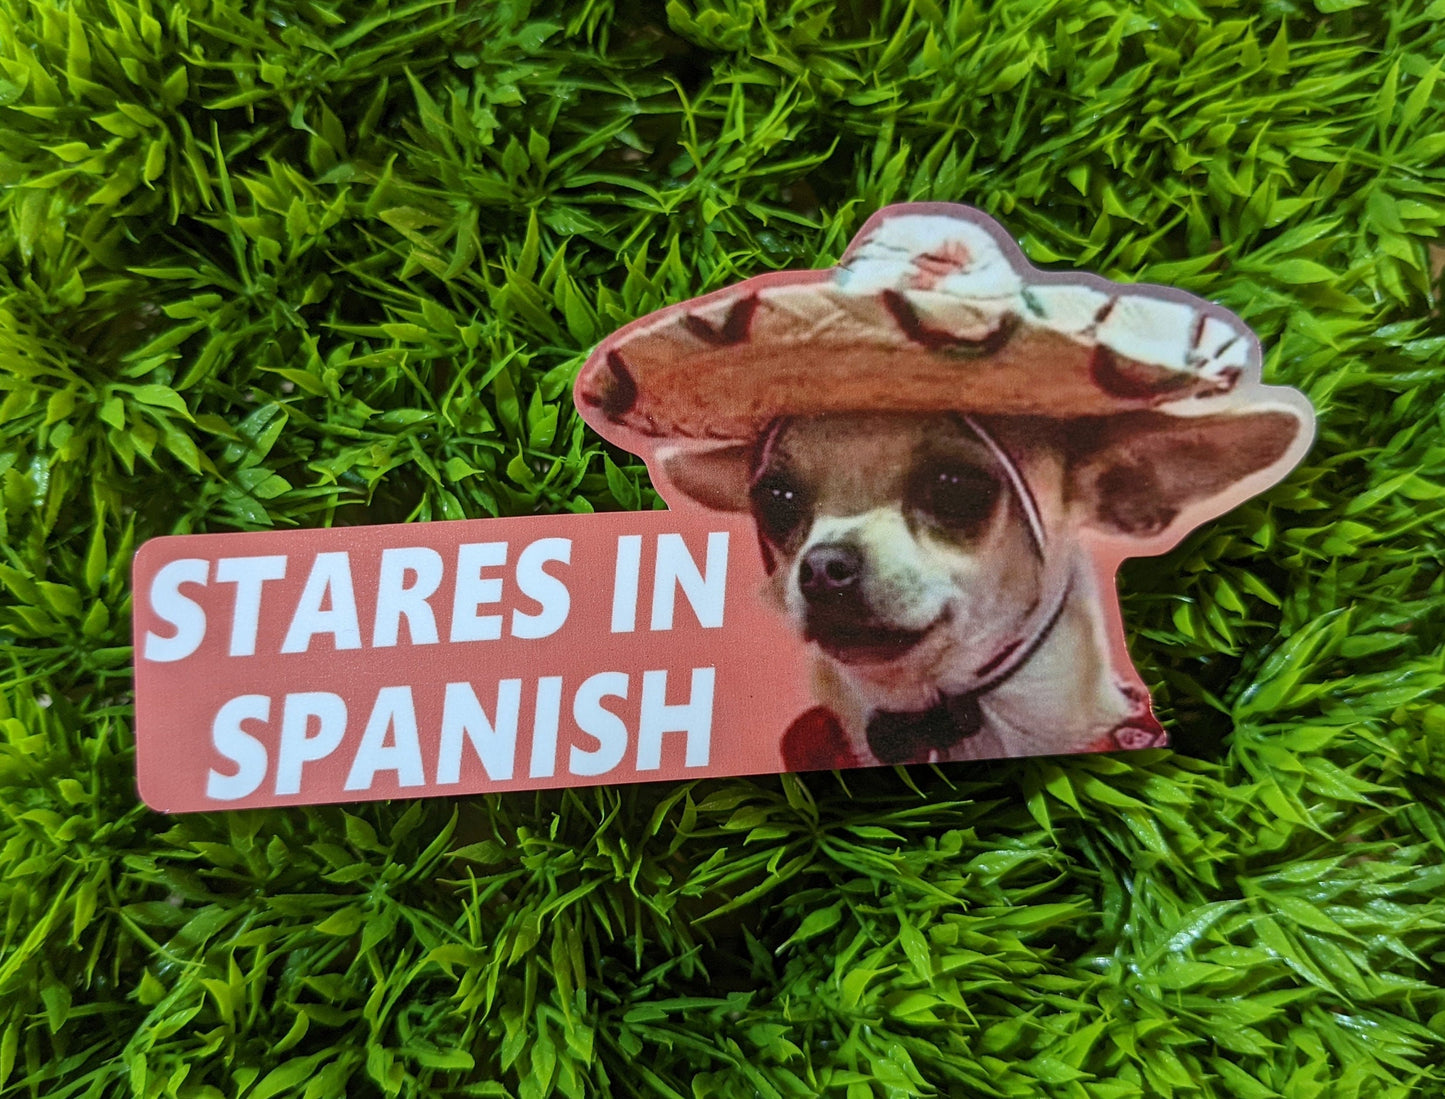 Stares In Spanish Chihuahua Meme Sticker Decal